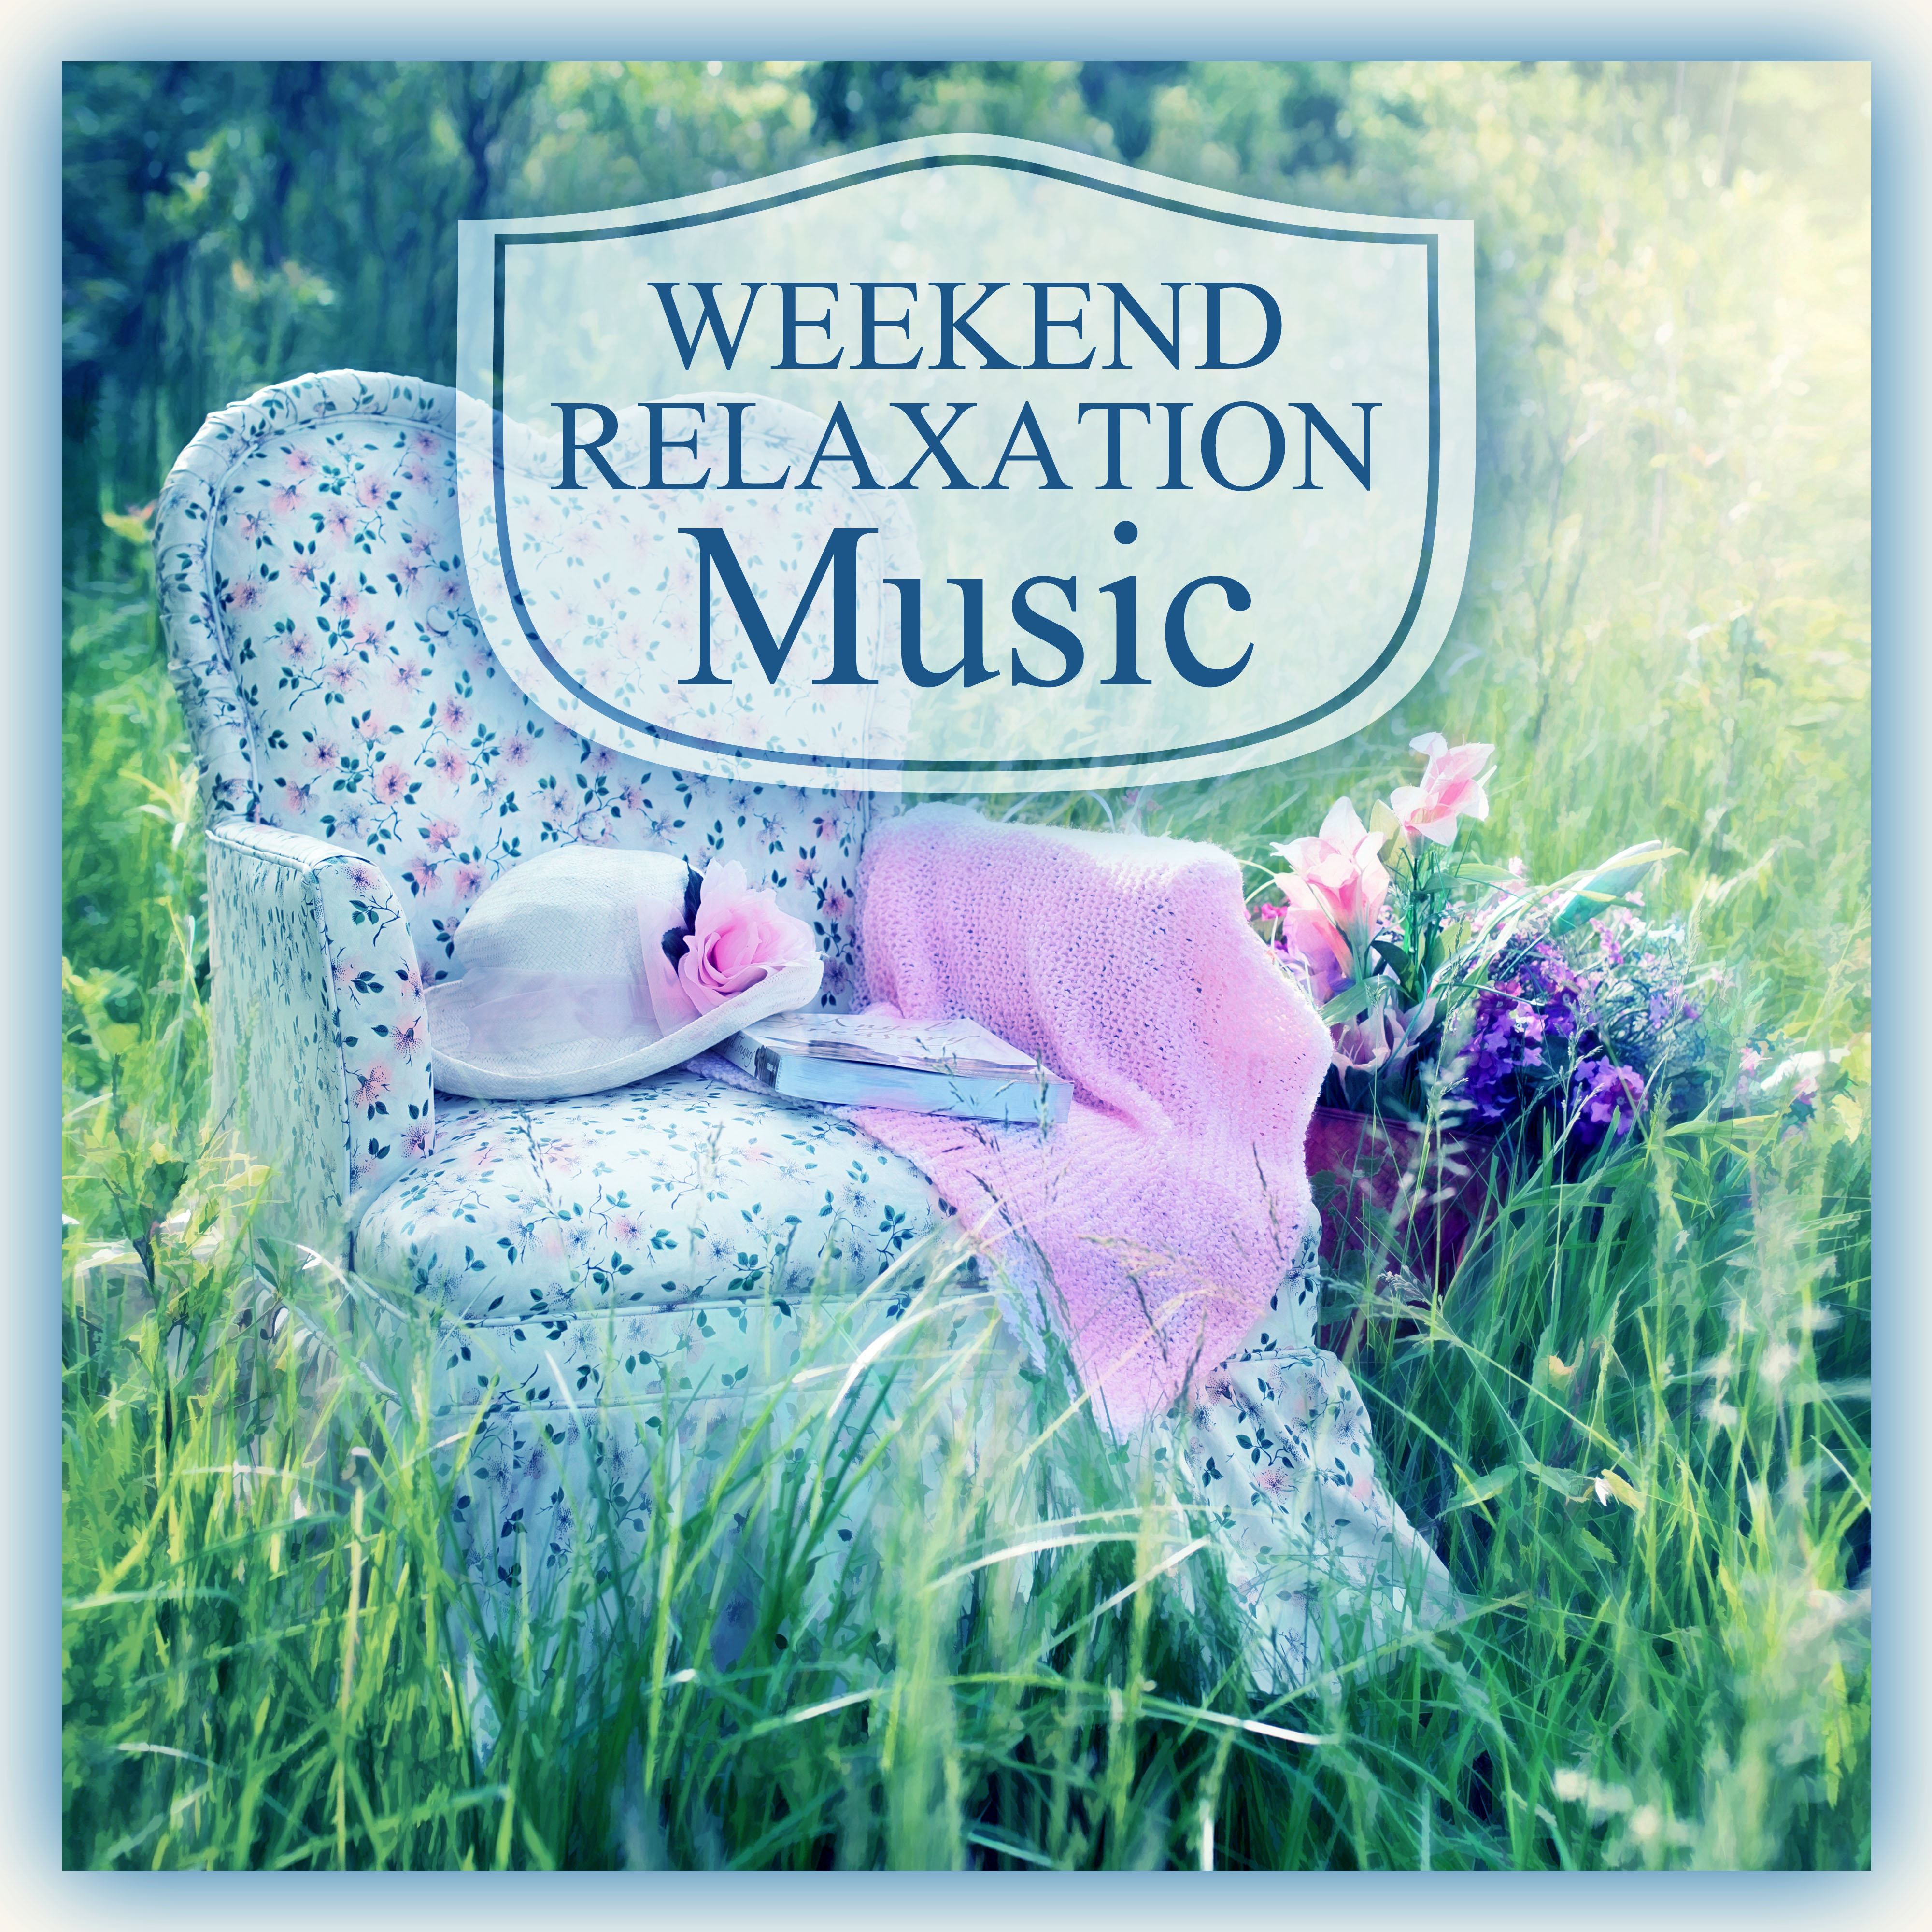 Weekend Relaxation Music  Music for Deep Relax  Time to Meditation, Spa, Wellness  Yoga, Healing Smooth Sounds for Therapy